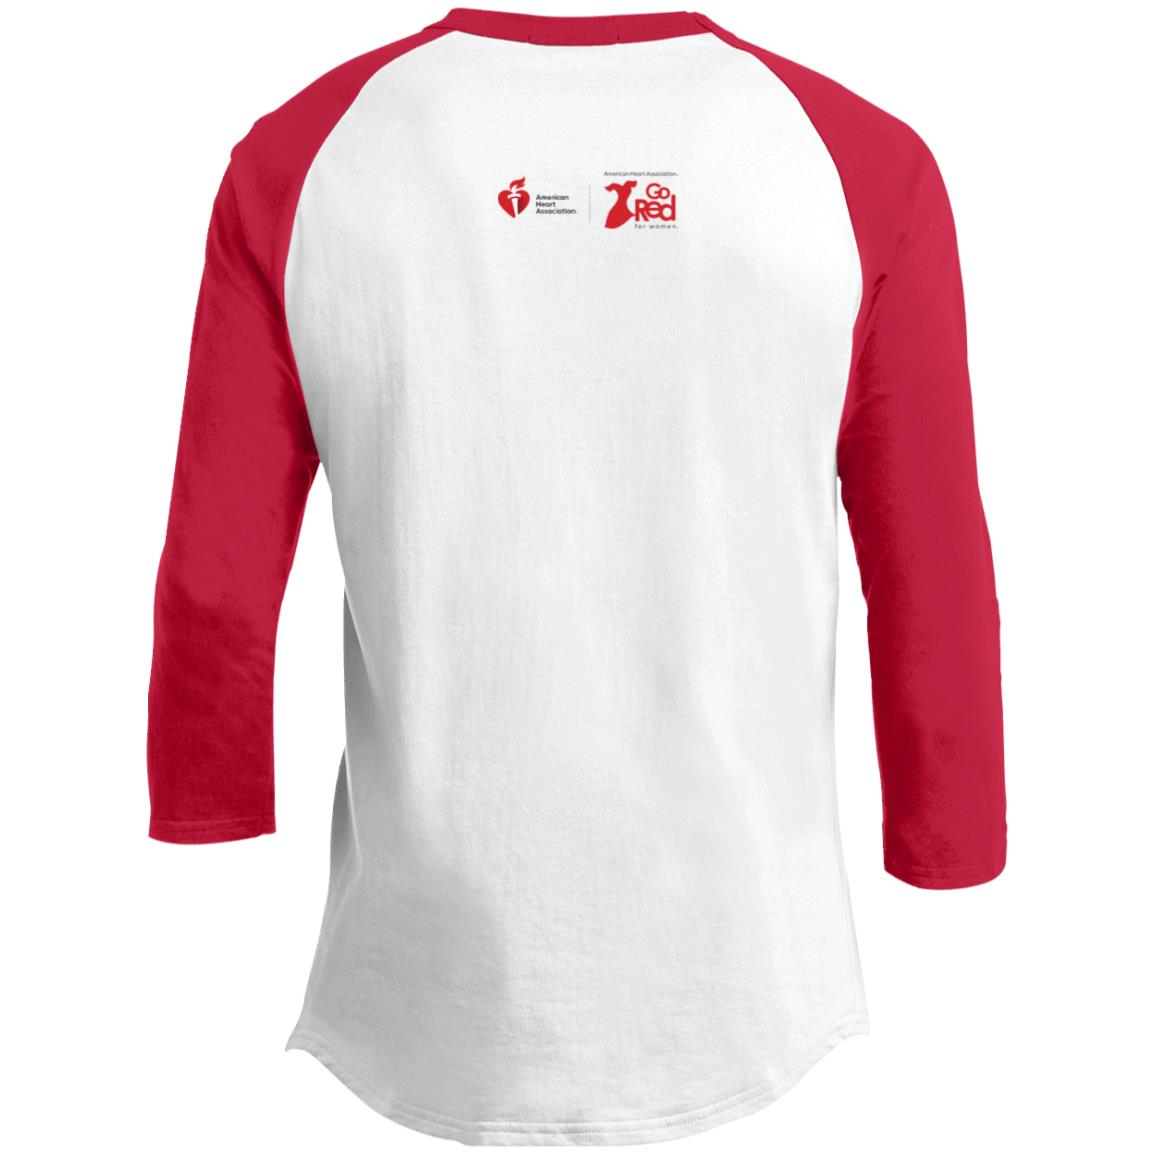 Back of shirt includes AHA and Go Red brand symbols placed on the top of back.